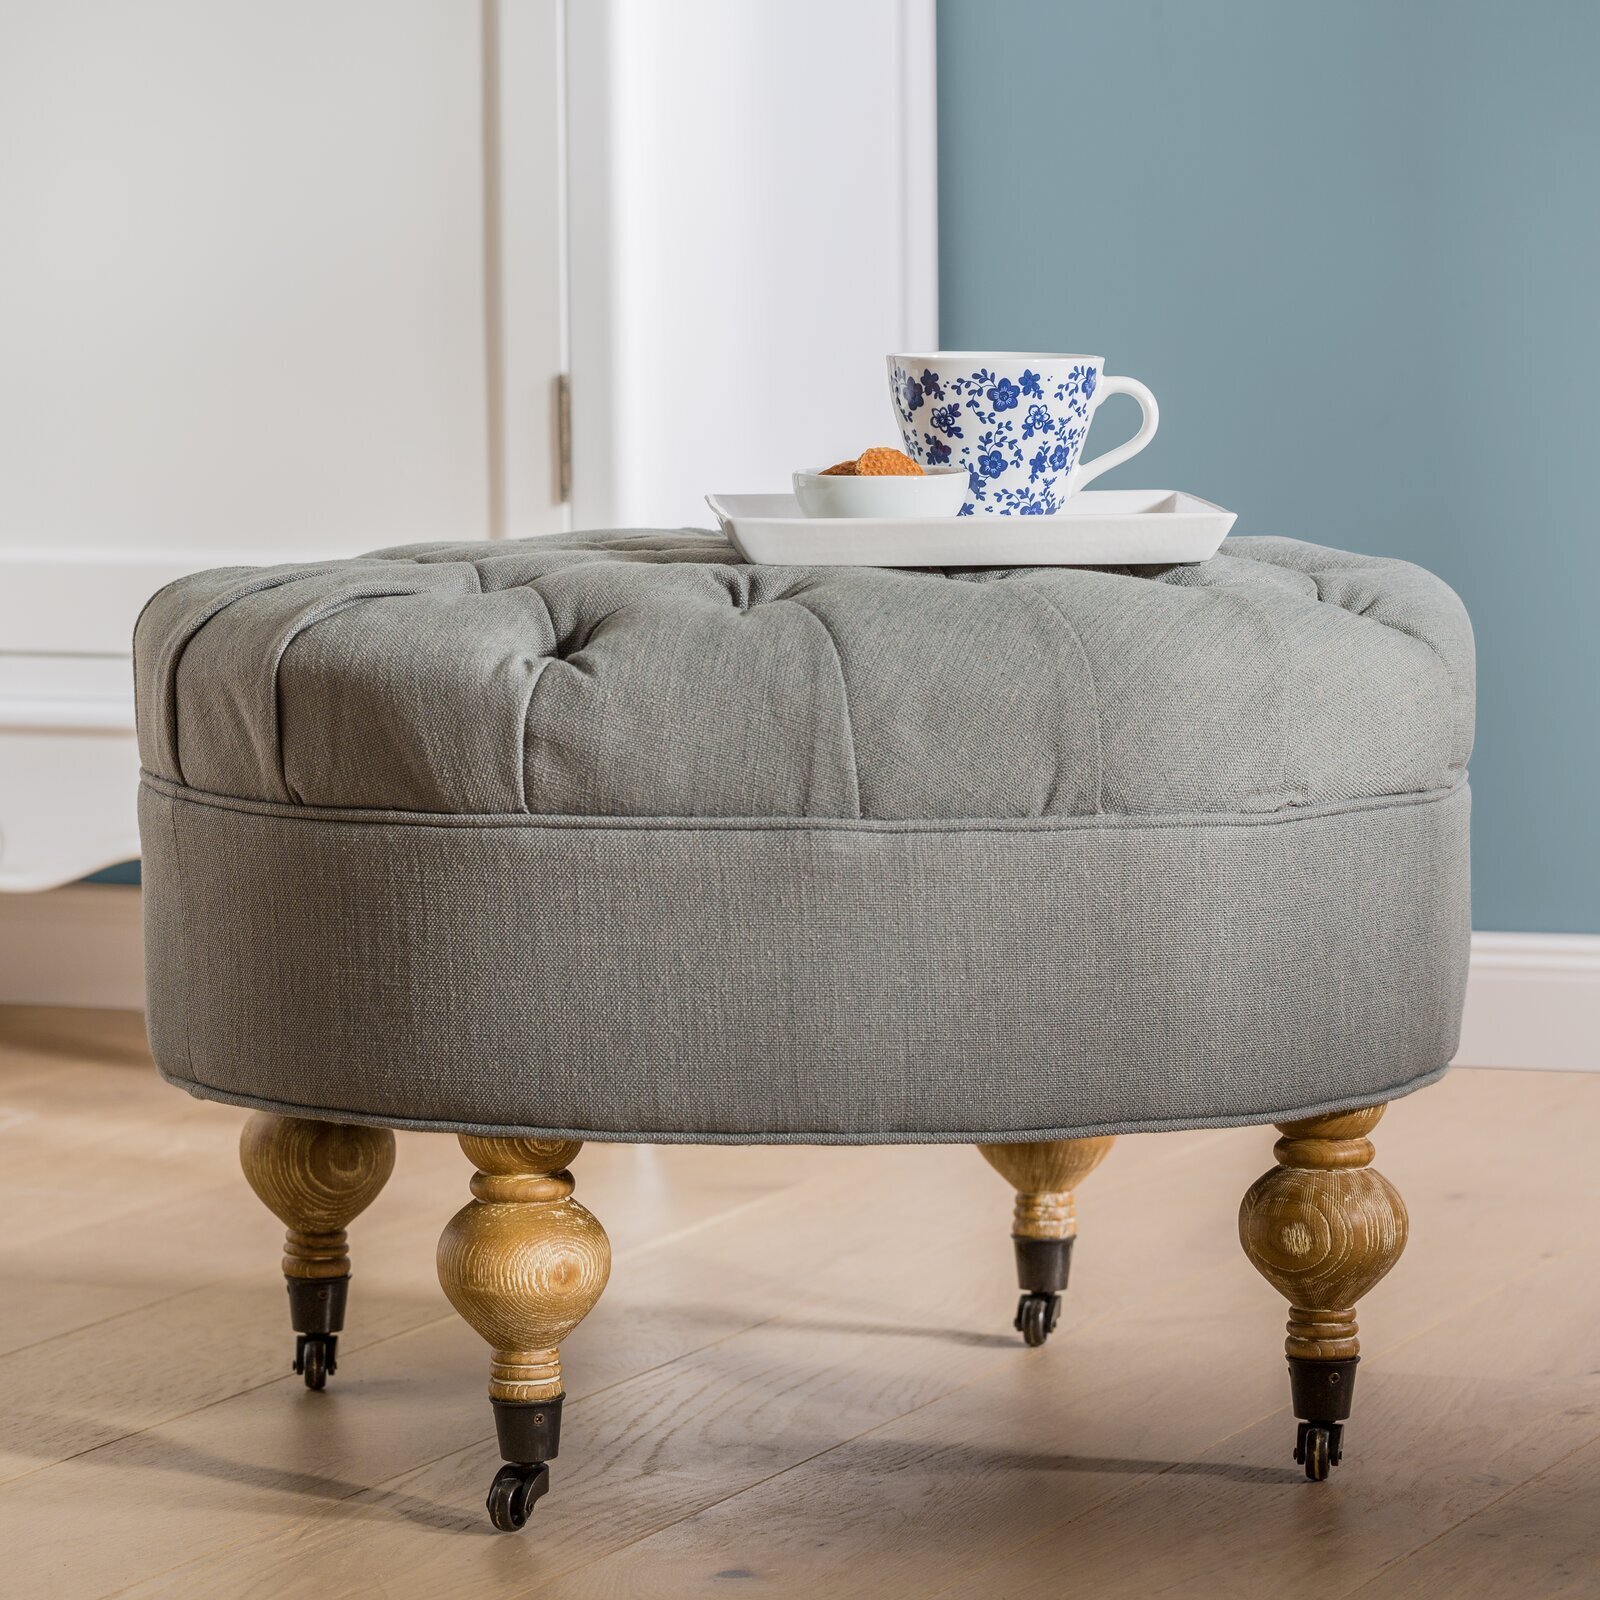 Sophisticated Round Ottoman on Wheels